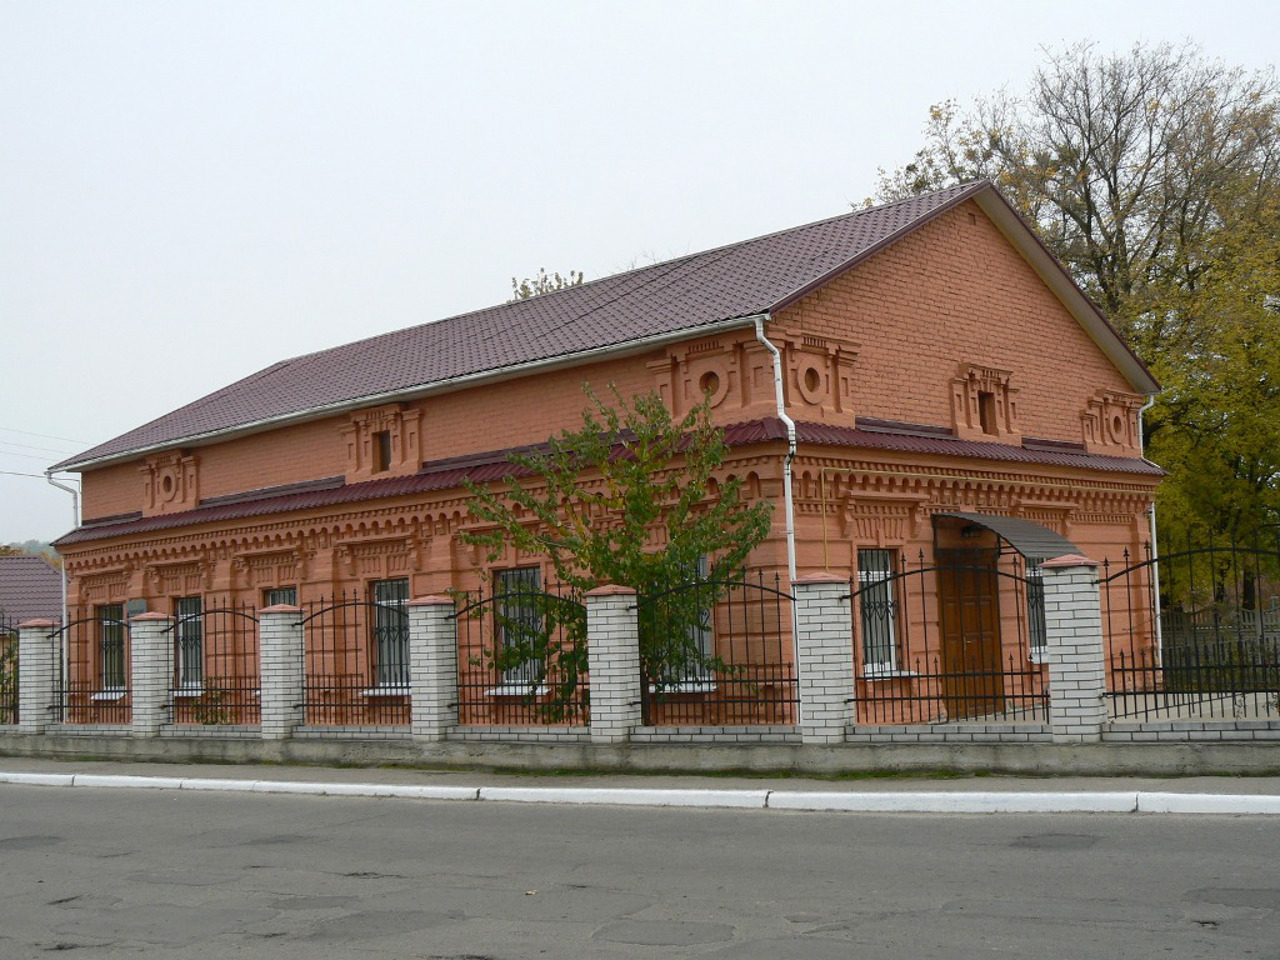 Rzhyshchiv Local Lore Museum